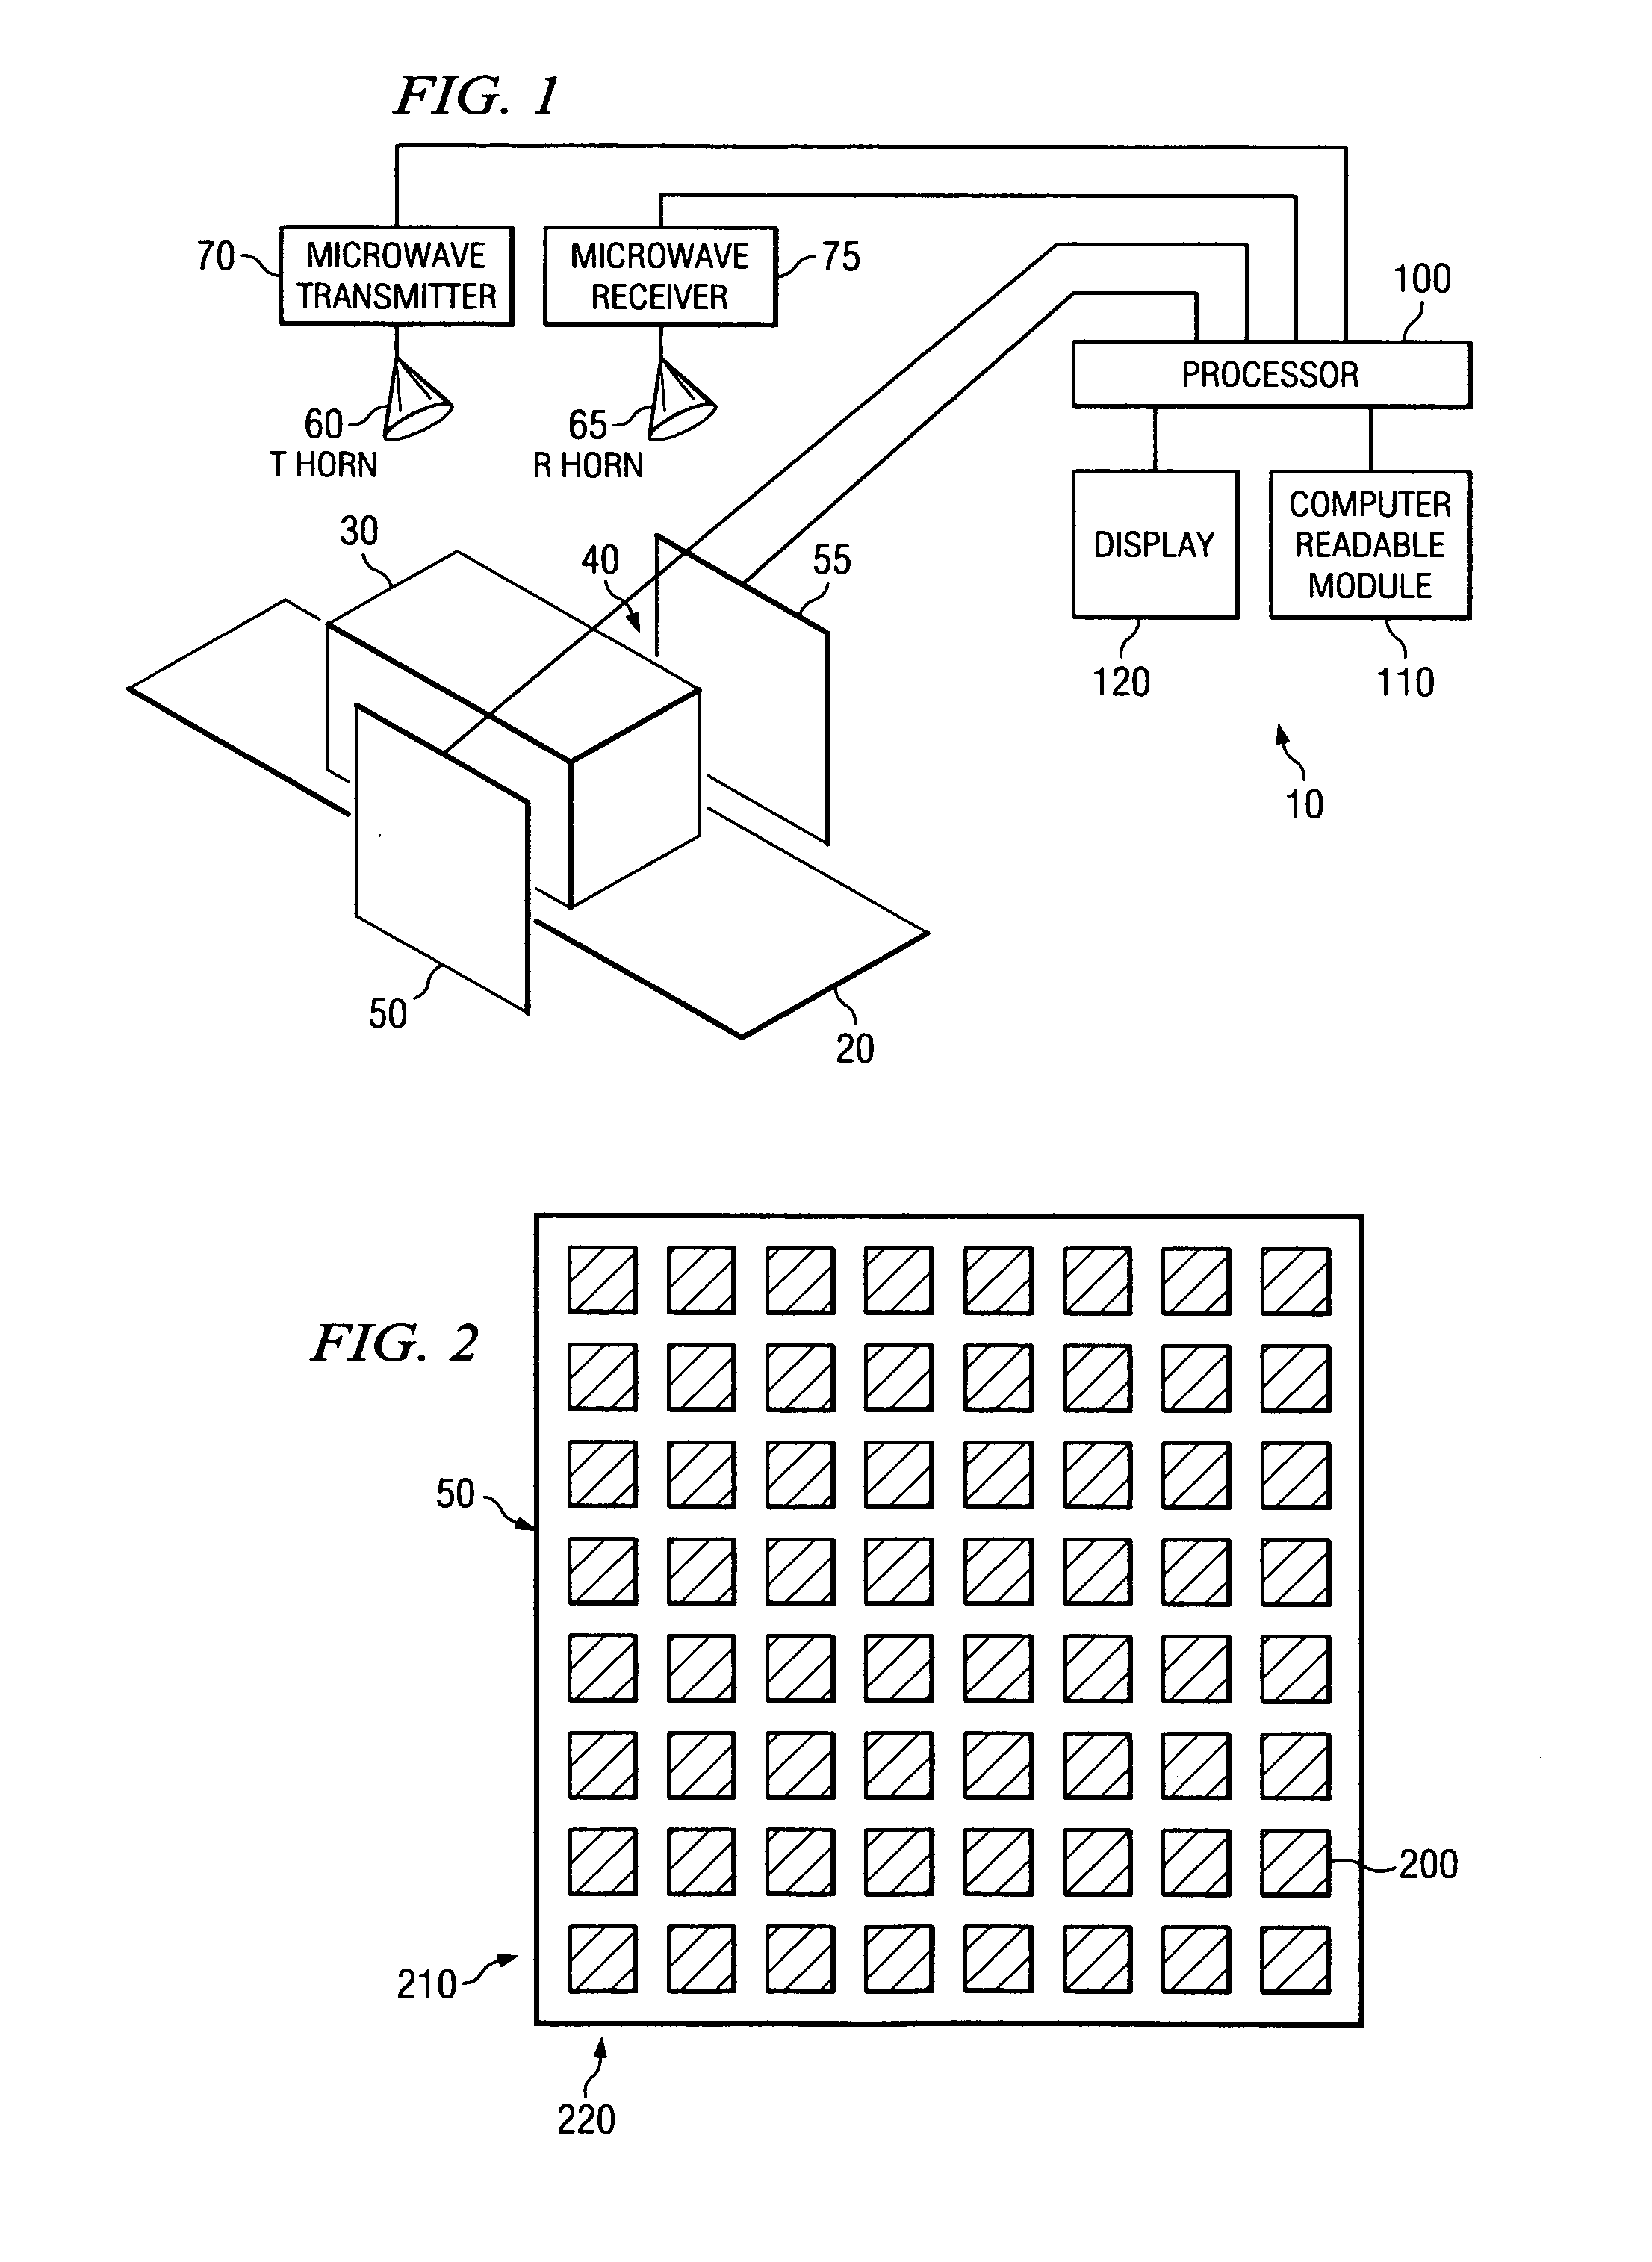 System and method for inspecting transportable items using microwave imaging